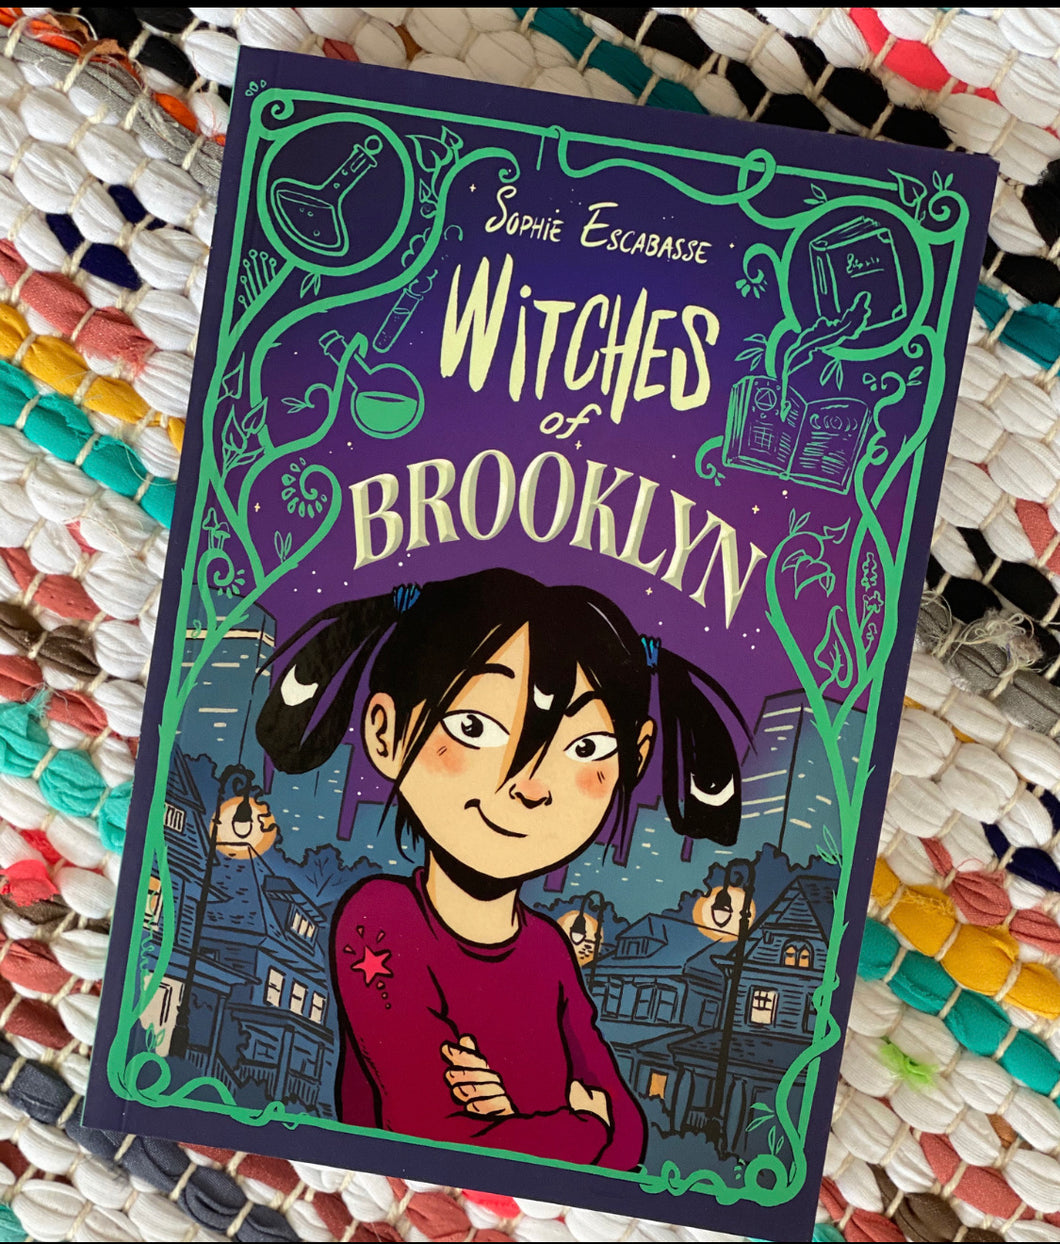 Witches of Brooklyn: (A Graphic Novel) (Witches of Brooklyn #1) | Sophie Escabasse